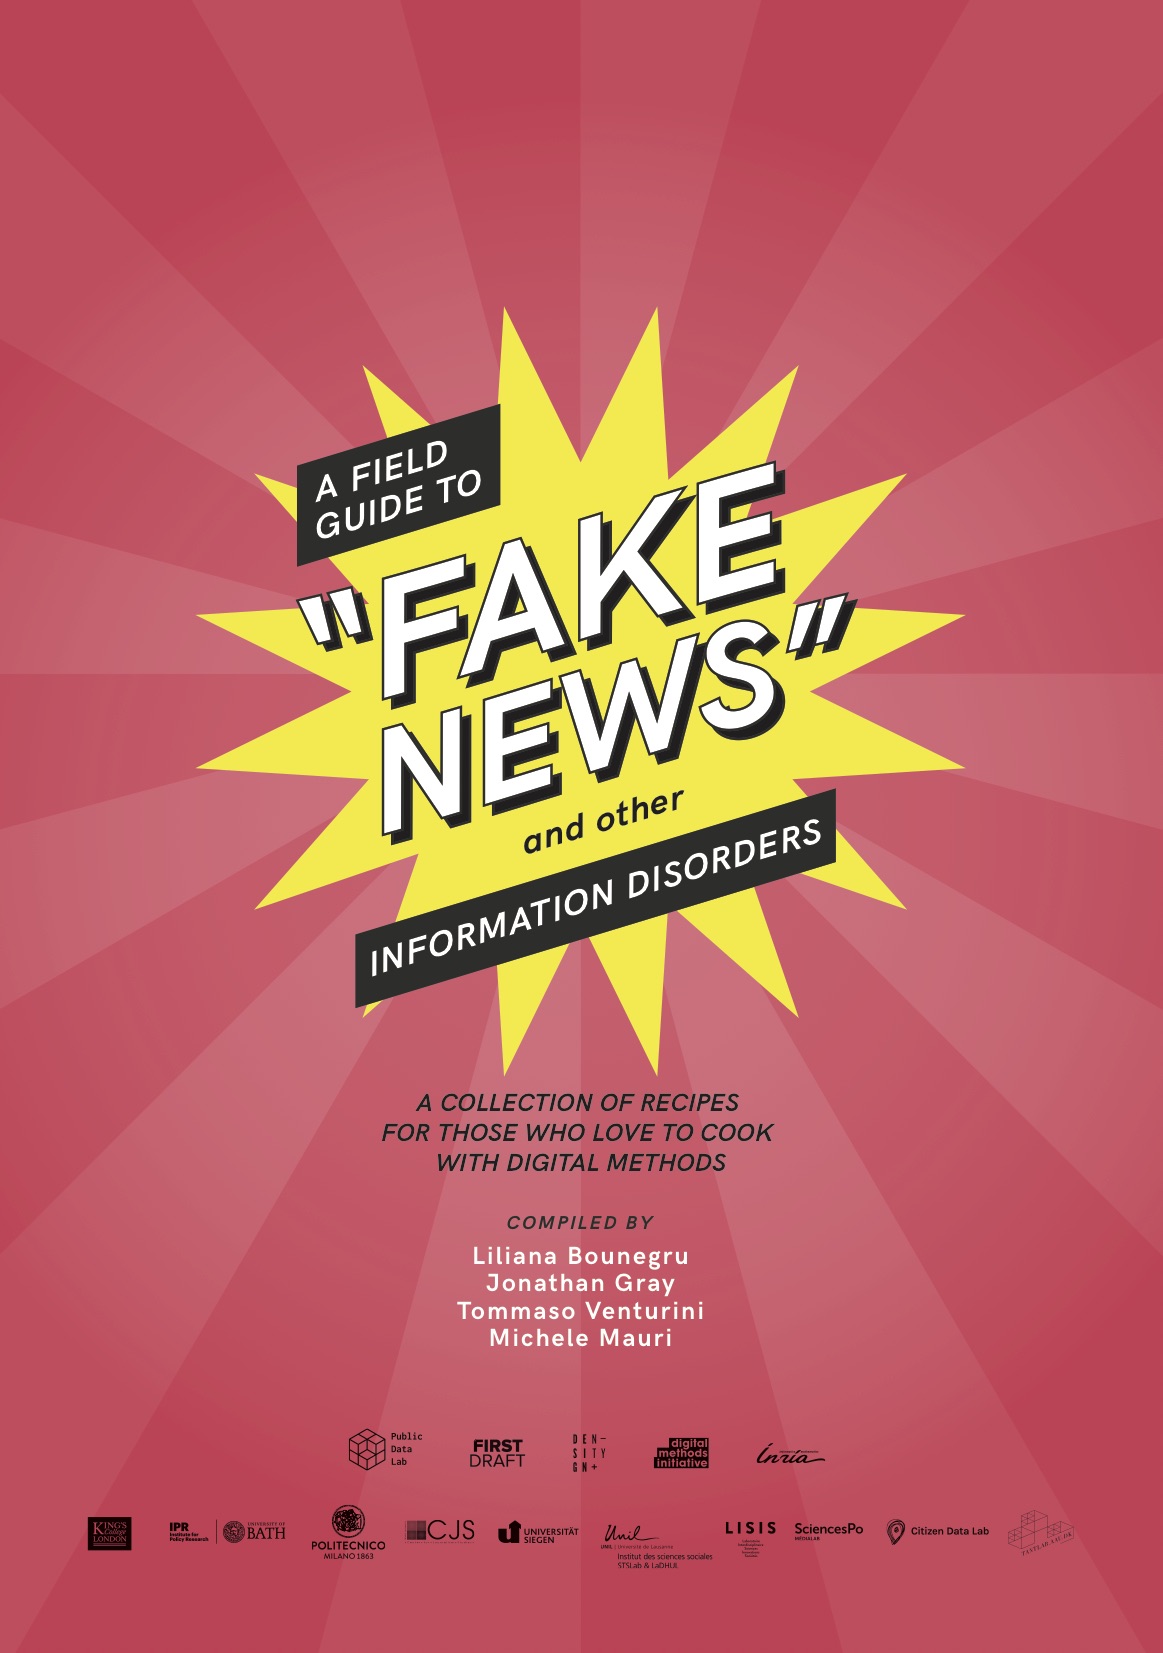 Portada del libro A Field Guide to "Fake News" and Other Information Disorders.